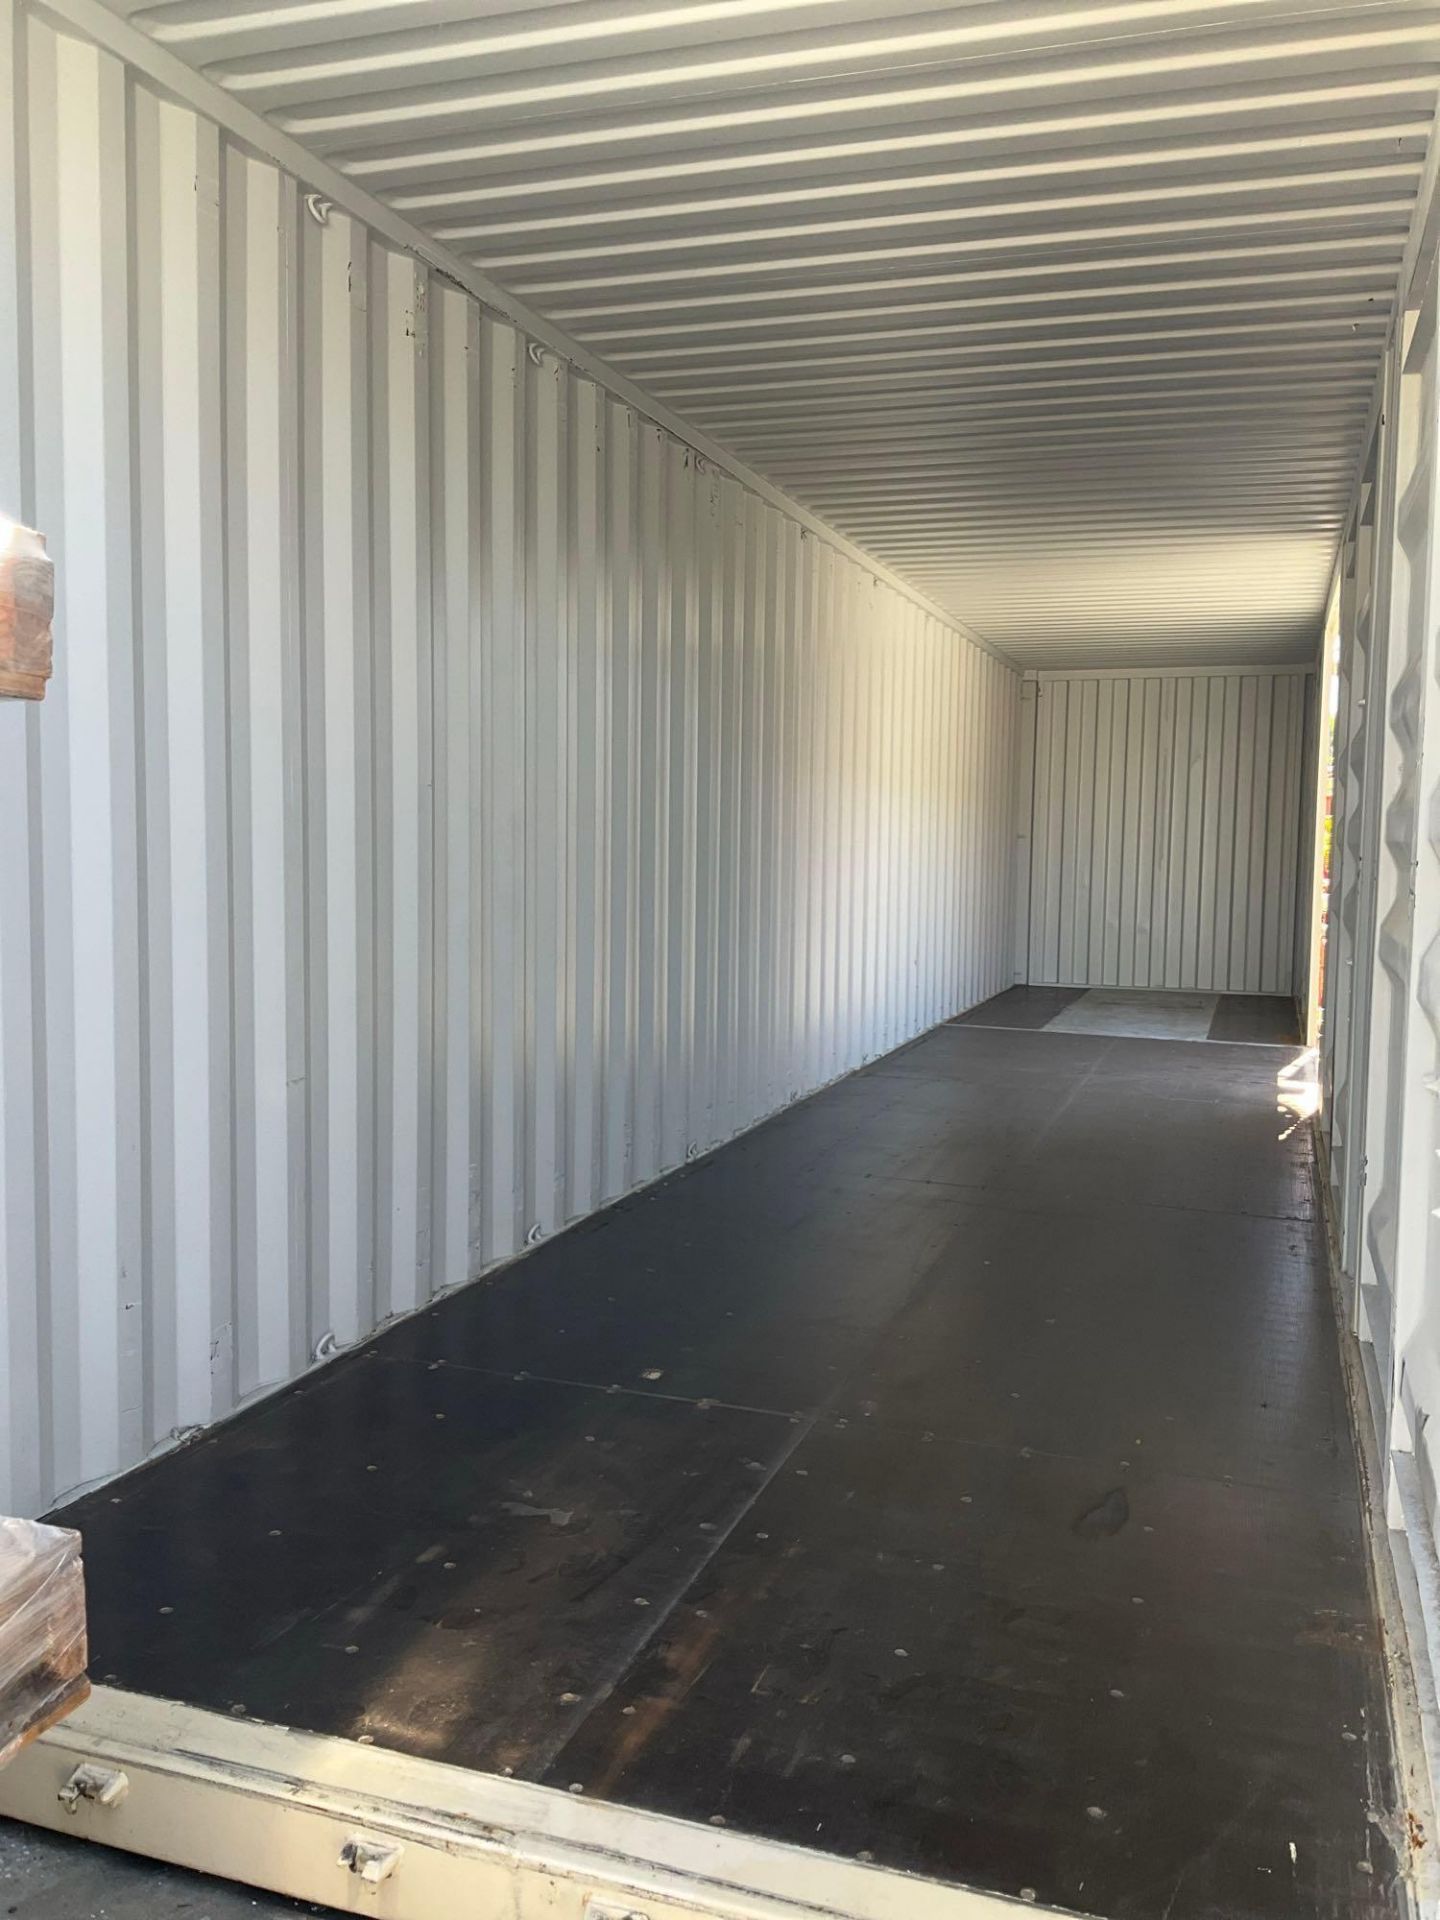 2023 40' STORAGE CONTAINER, APPROX 102" TALL x 96" WIDE x 40' DEEP - Image 6 of 9